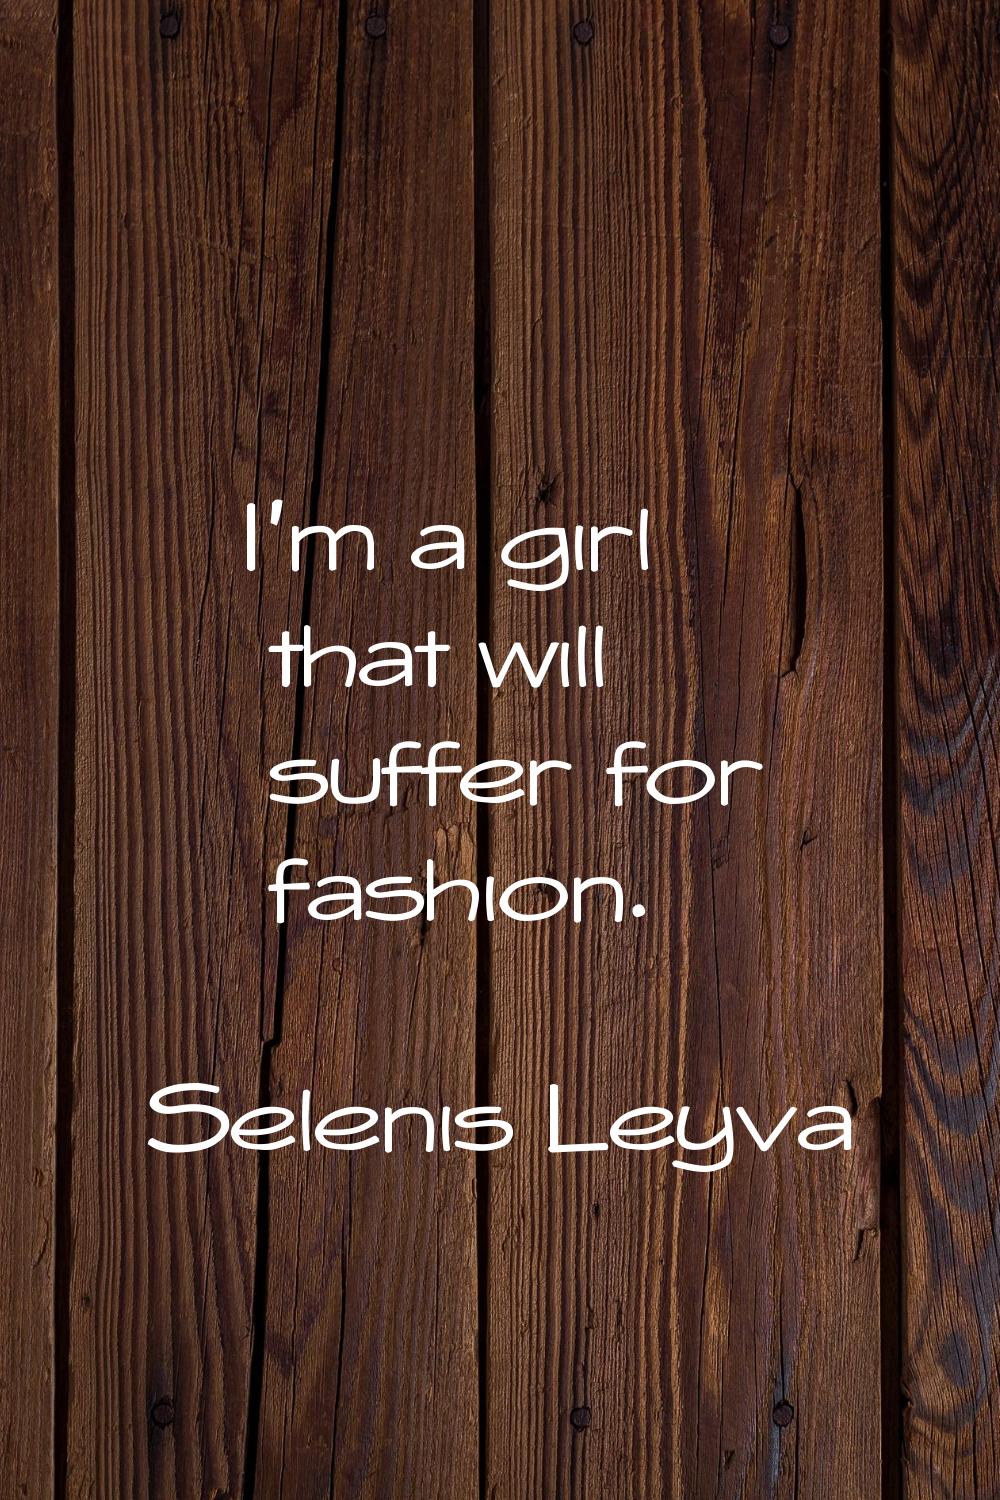 I'm a girl that will suffer for fashion.